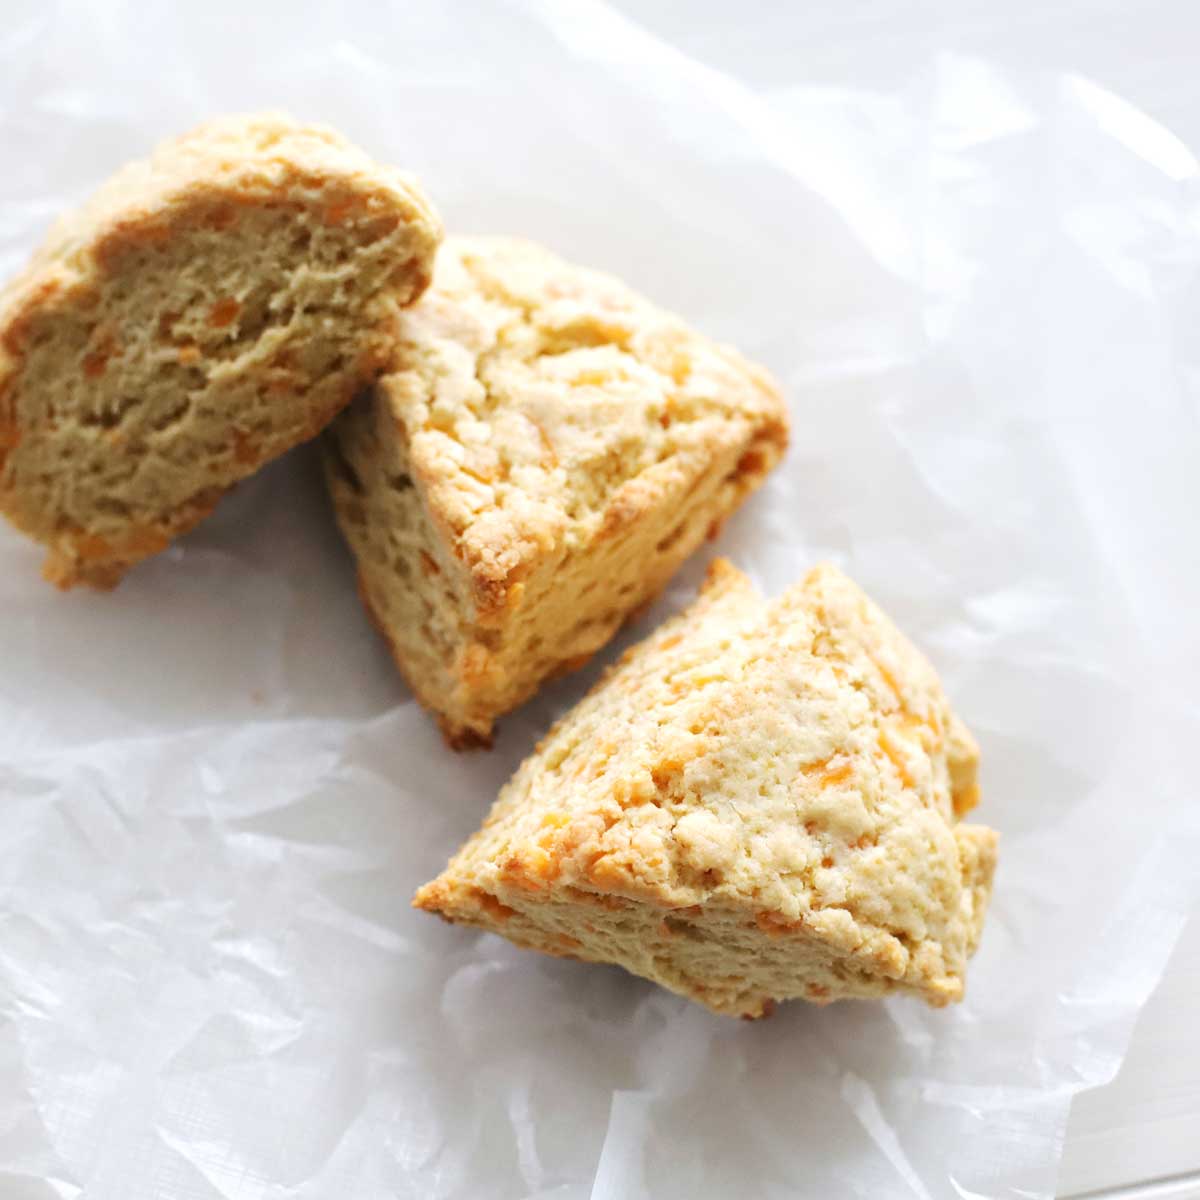 The Best Ever Vegan "Cheddar Cheese" Scones - Vegan Cheddar Cheese Scones